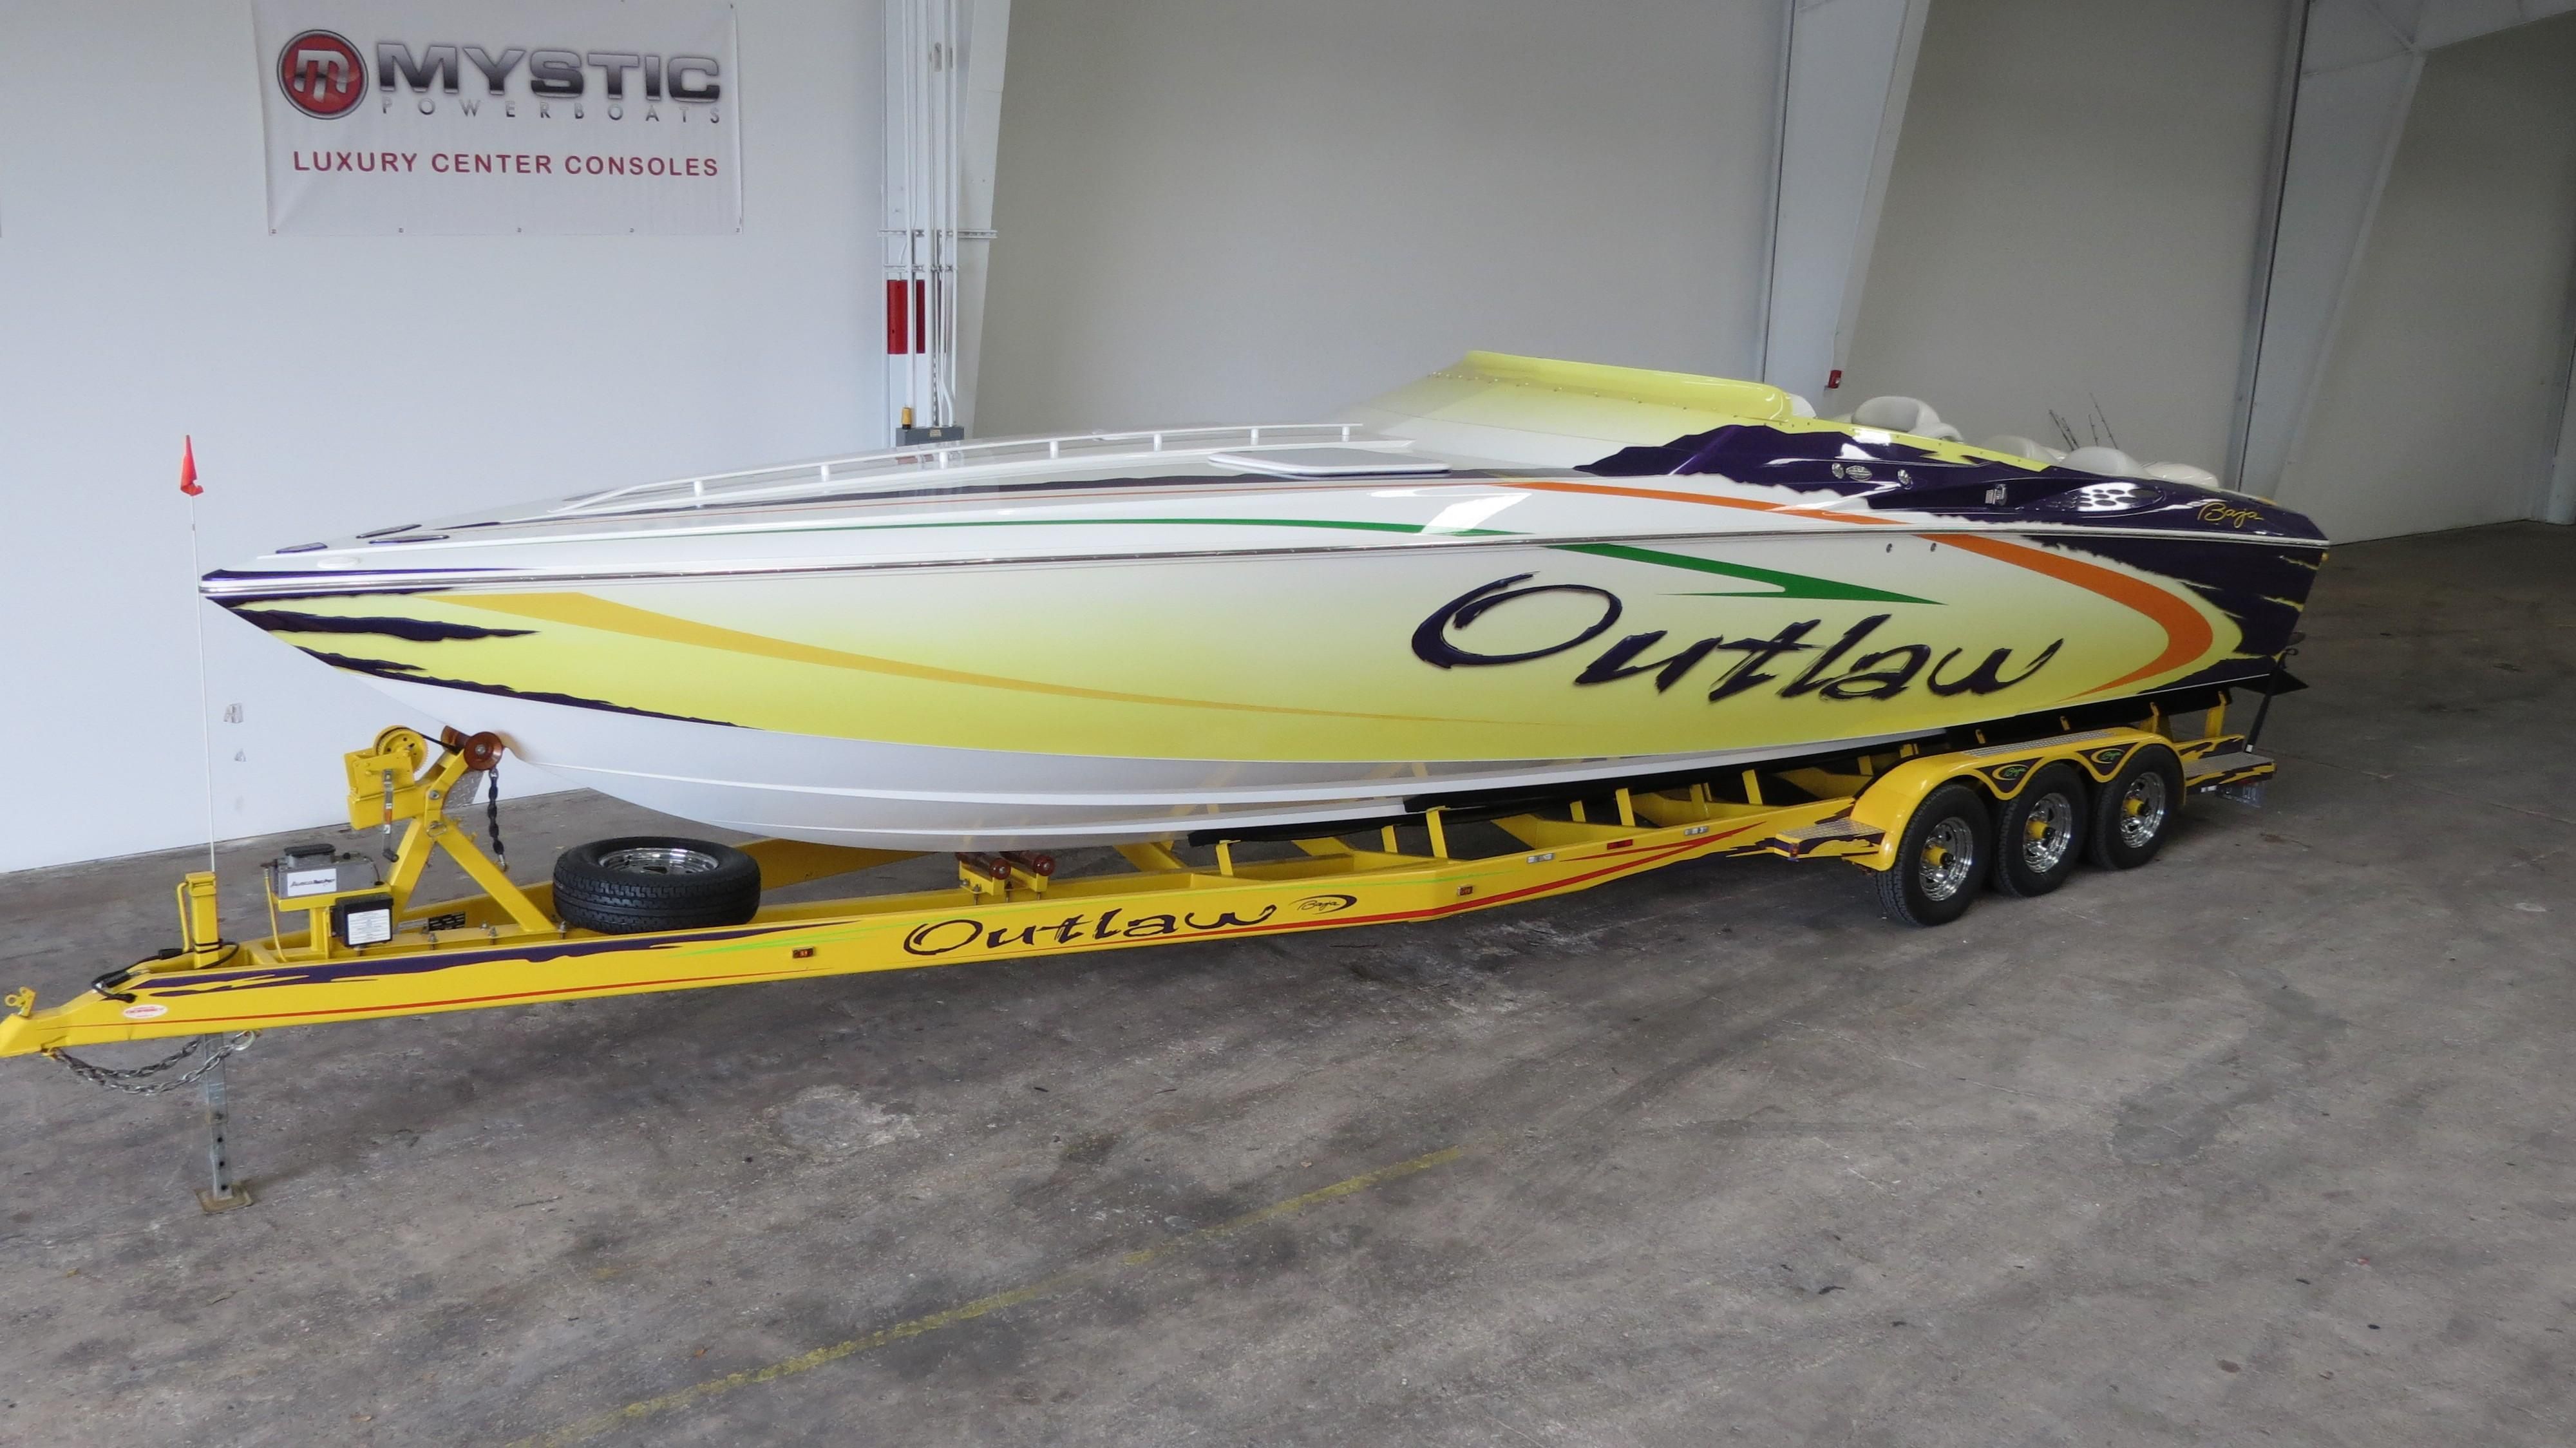 2001 Baja 36 Outlaw Power boat for sale, located in Florida, SARASOTA.